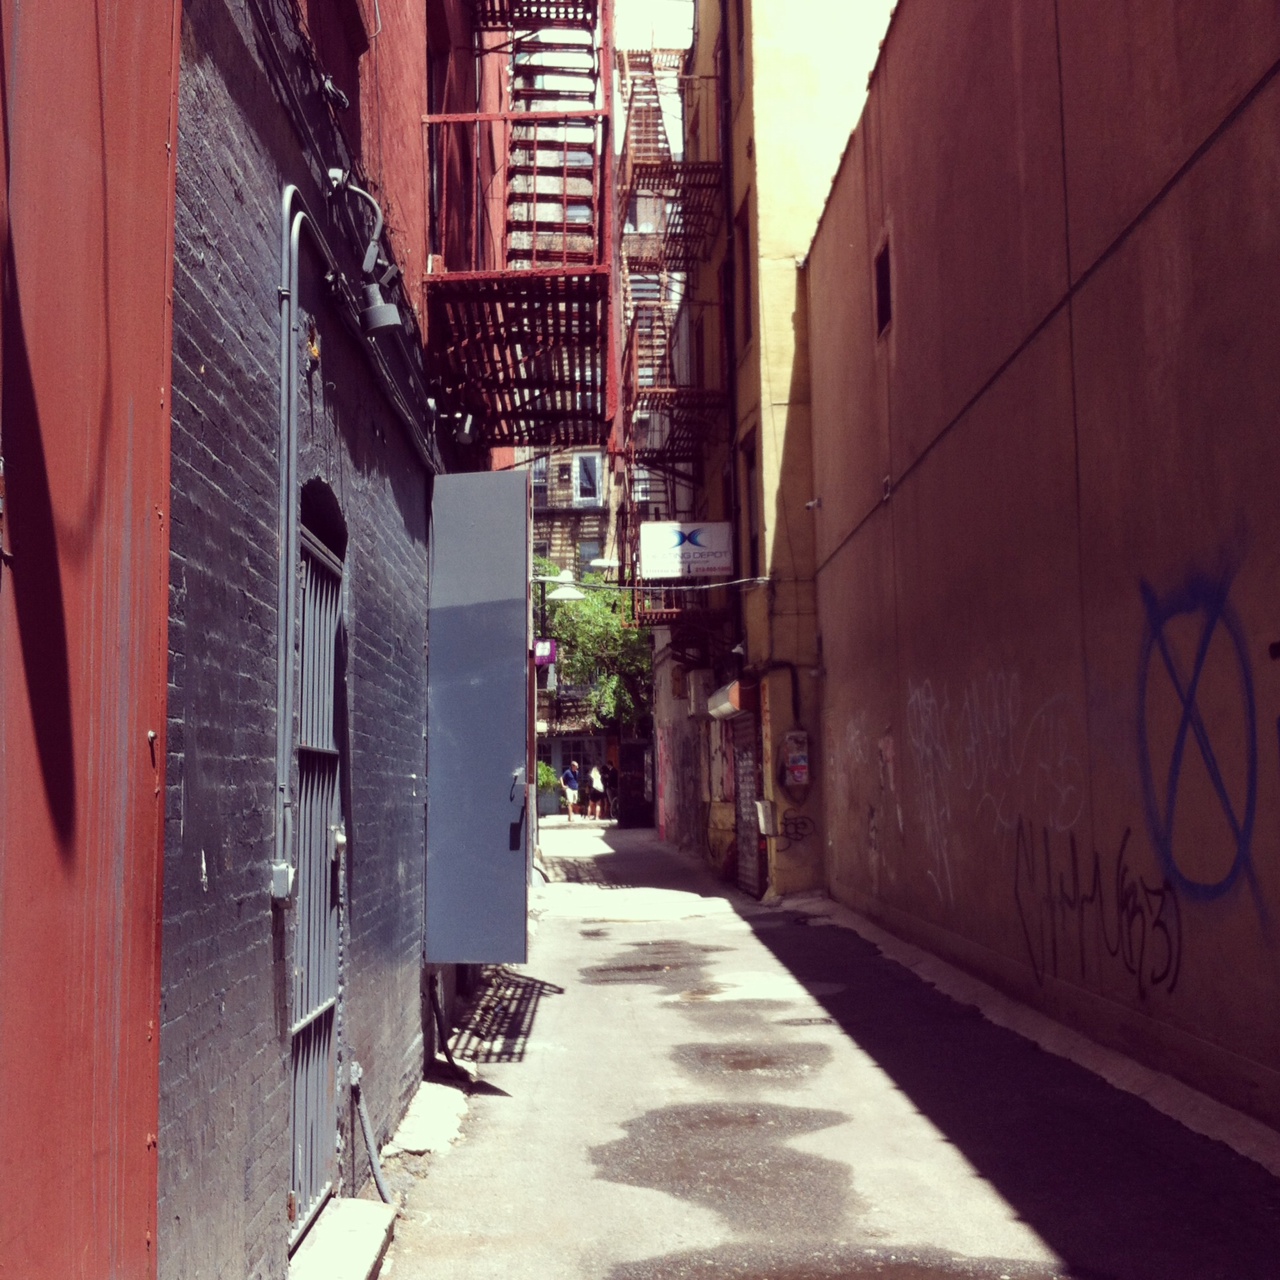 Freemans Alley, Bowery